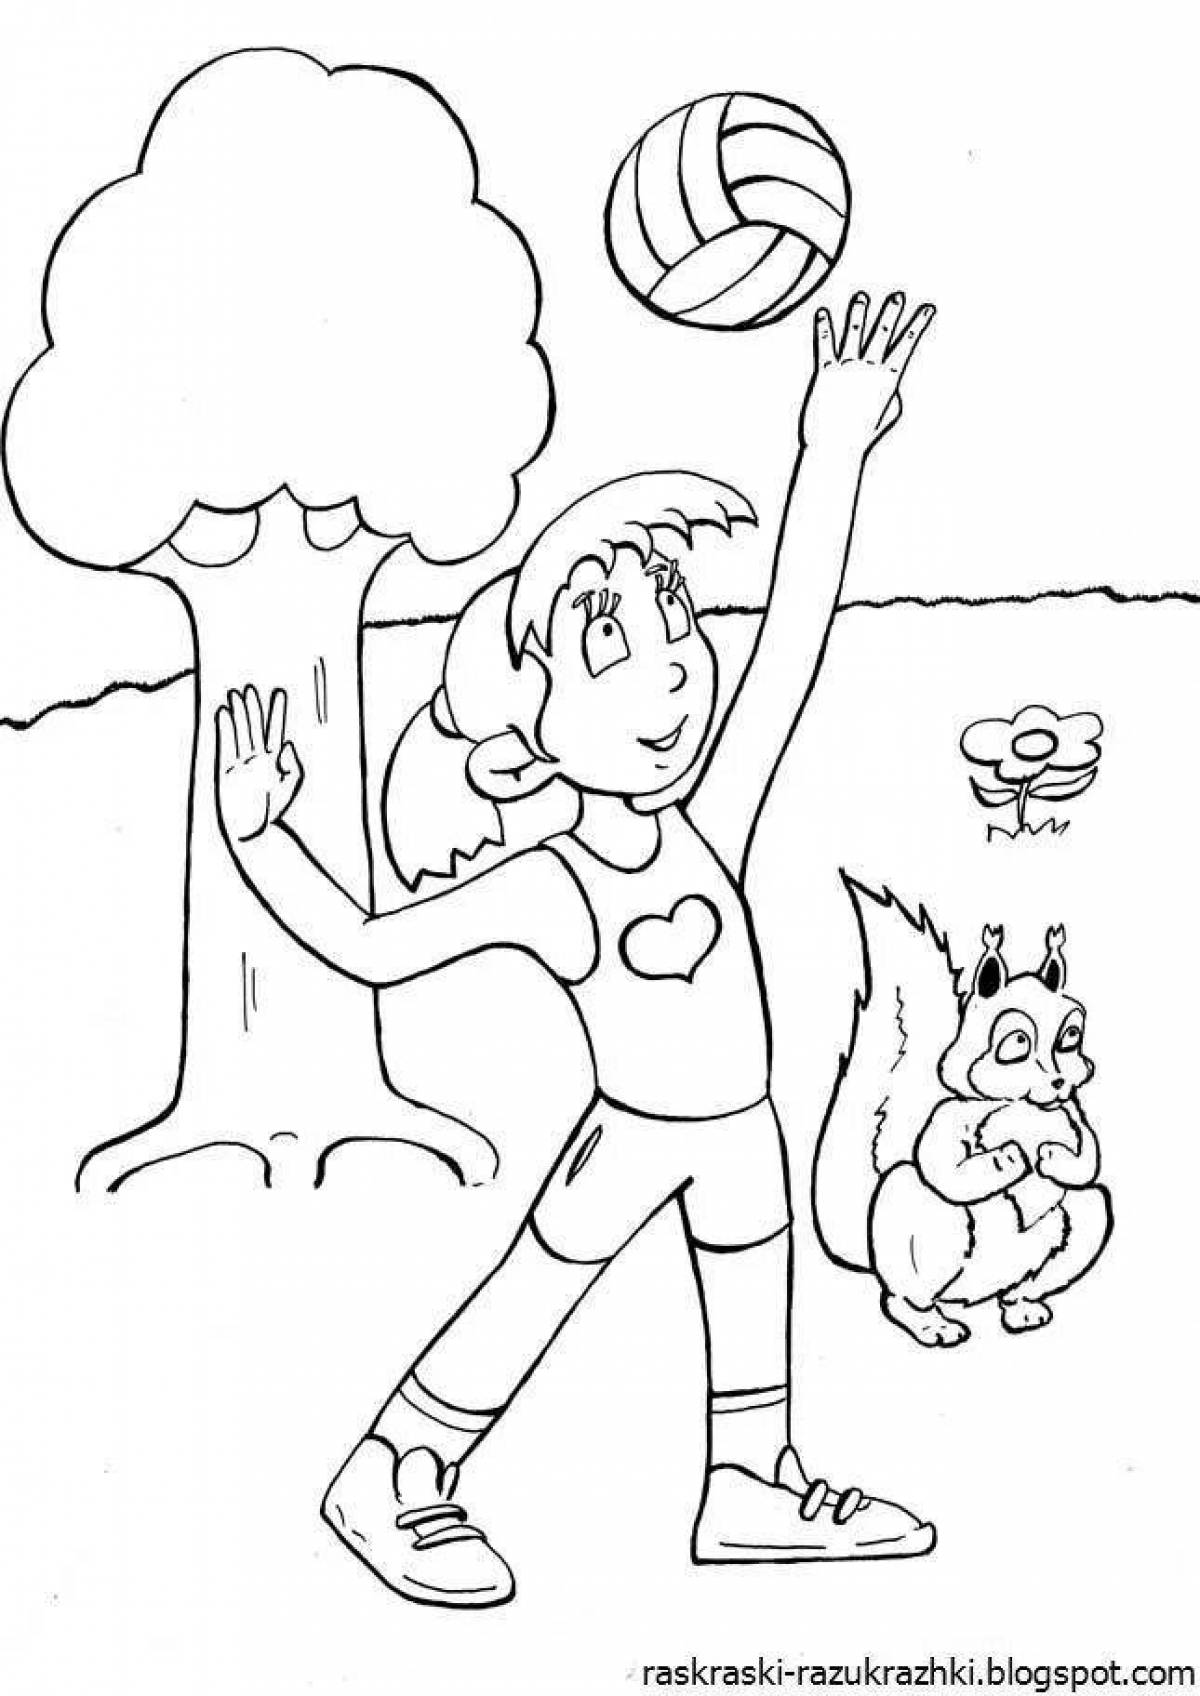 Fun coloring book for kids about health